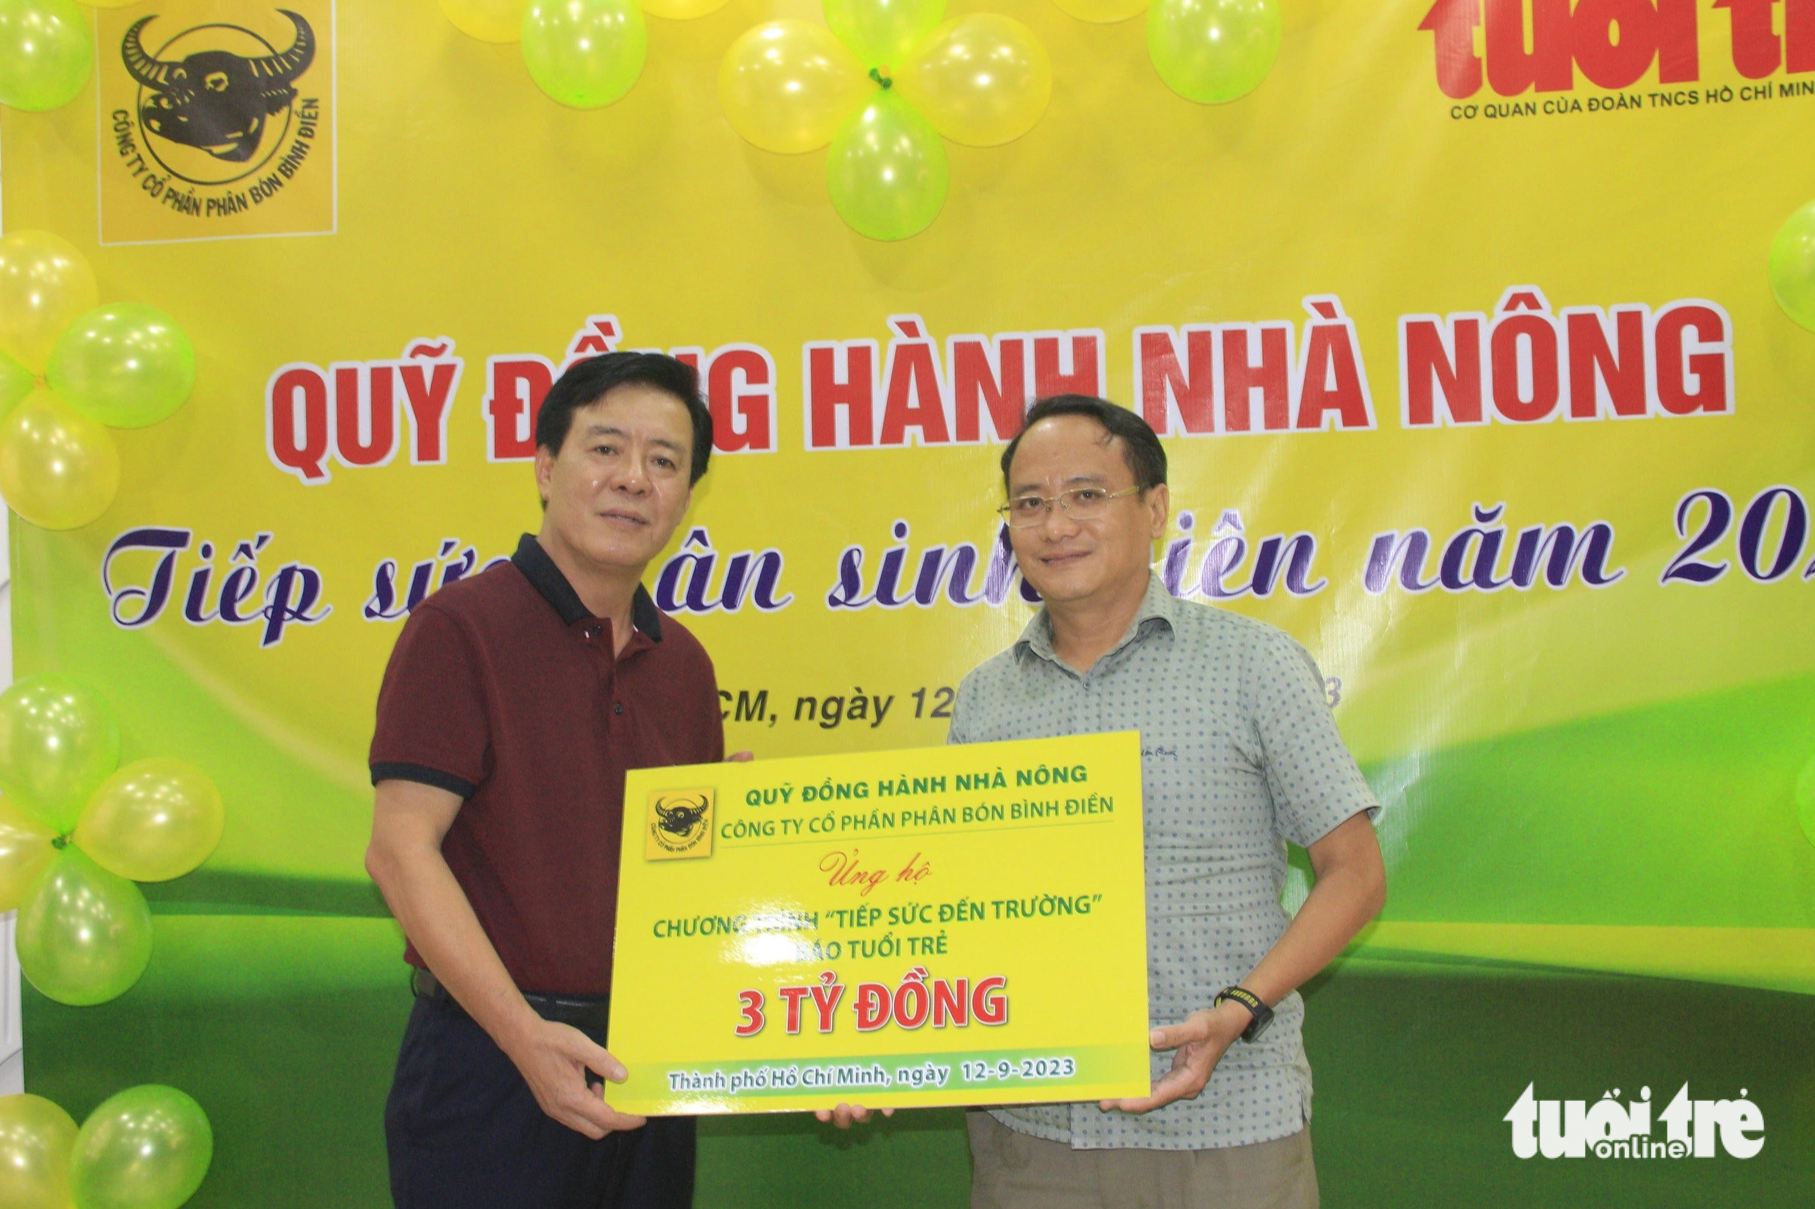 Mr Ngo Van Dong (left) handed over 3 billion VND to Nguyen Hoang Nguyen, deputy editor-in-chief of Tuoi Tre newspaper - Photo: CONG TRIEU